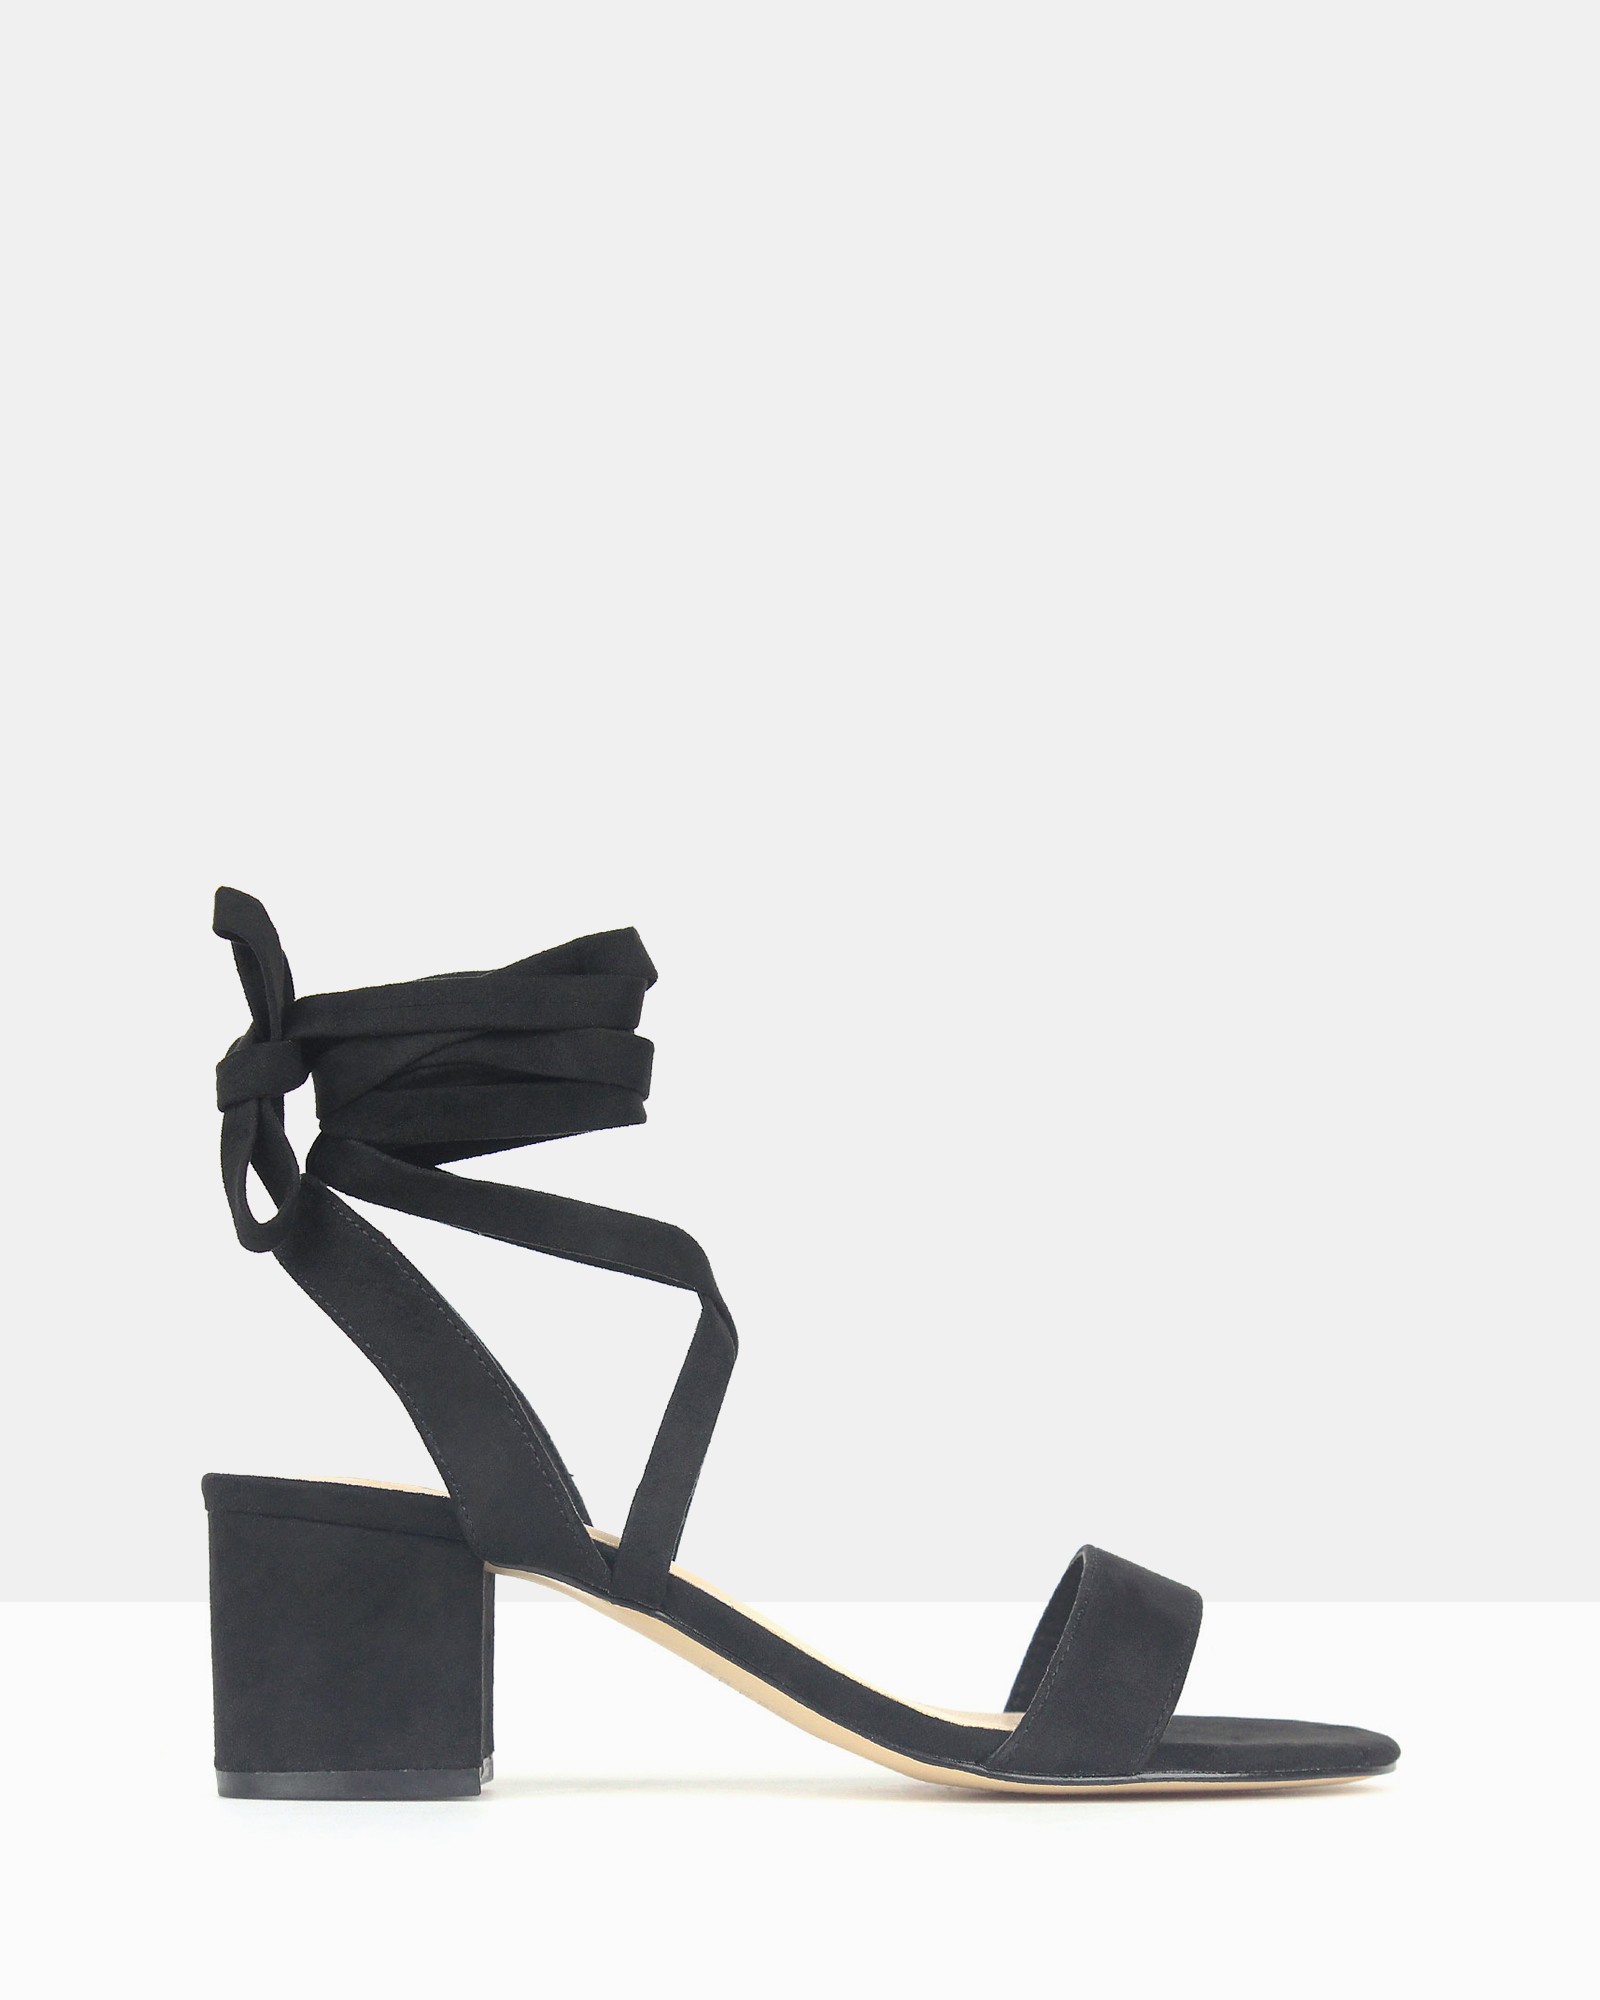 Chyna Lace-Up Block Heel Sandals Black by Betts | ShoeSales